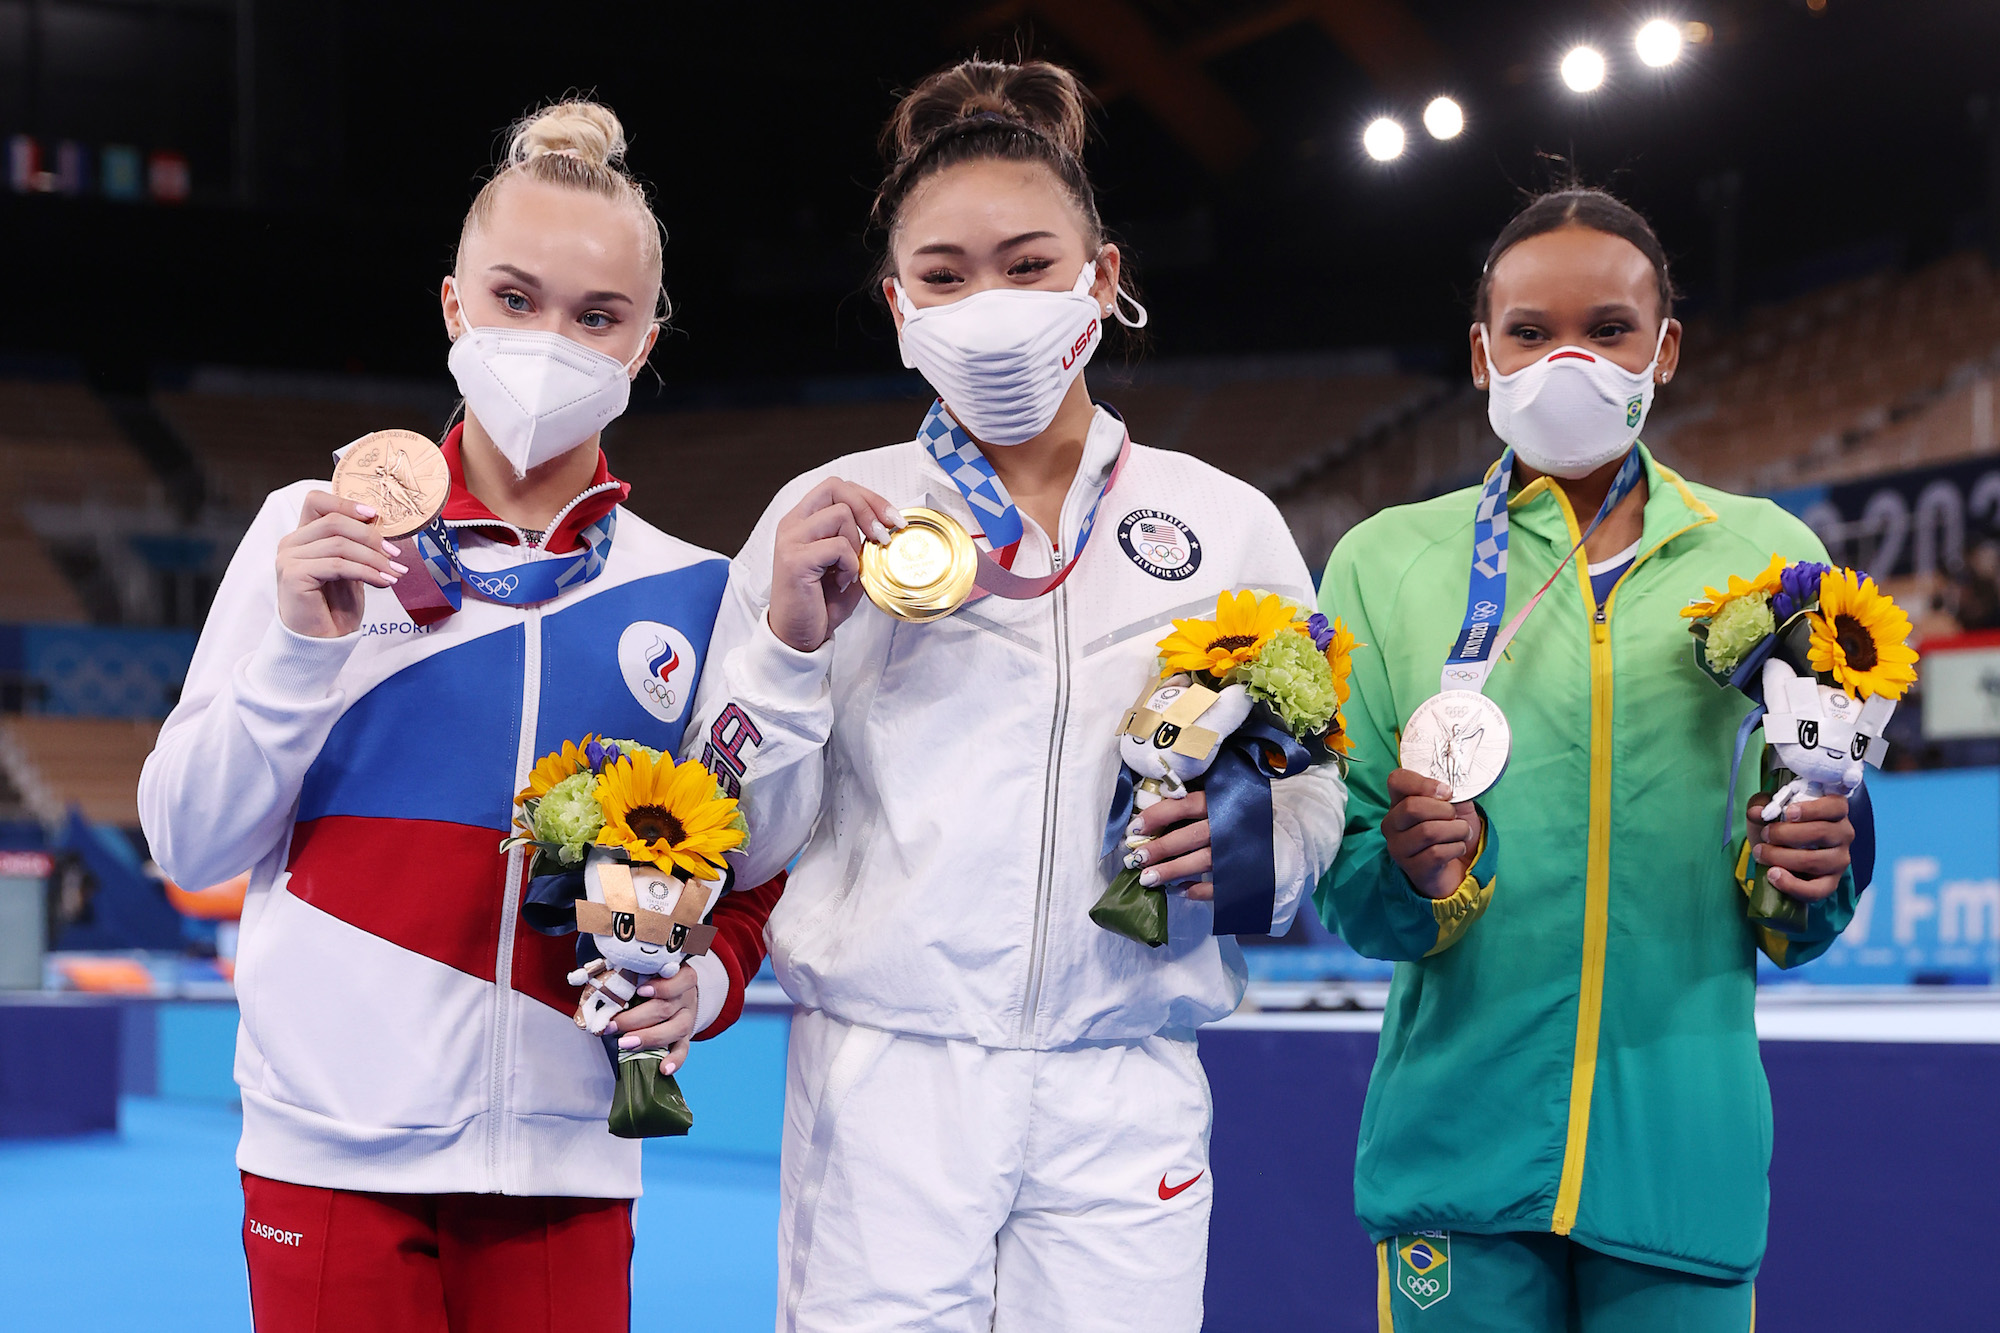 Bronze medalist Angelina Melnikova of Team ROC, gold medalist Sunisa Lee of Team United States and silver medalist Rebeca Andrade of Team Brazil pose for a photo after the Women's All-Around Final on day six of the Tokyo 2020 Olympic Games at Ariake Gymnastics Centre on July 29, 2021 in Tokyo, Japan. Photo: Jamie Squire/Getty Images